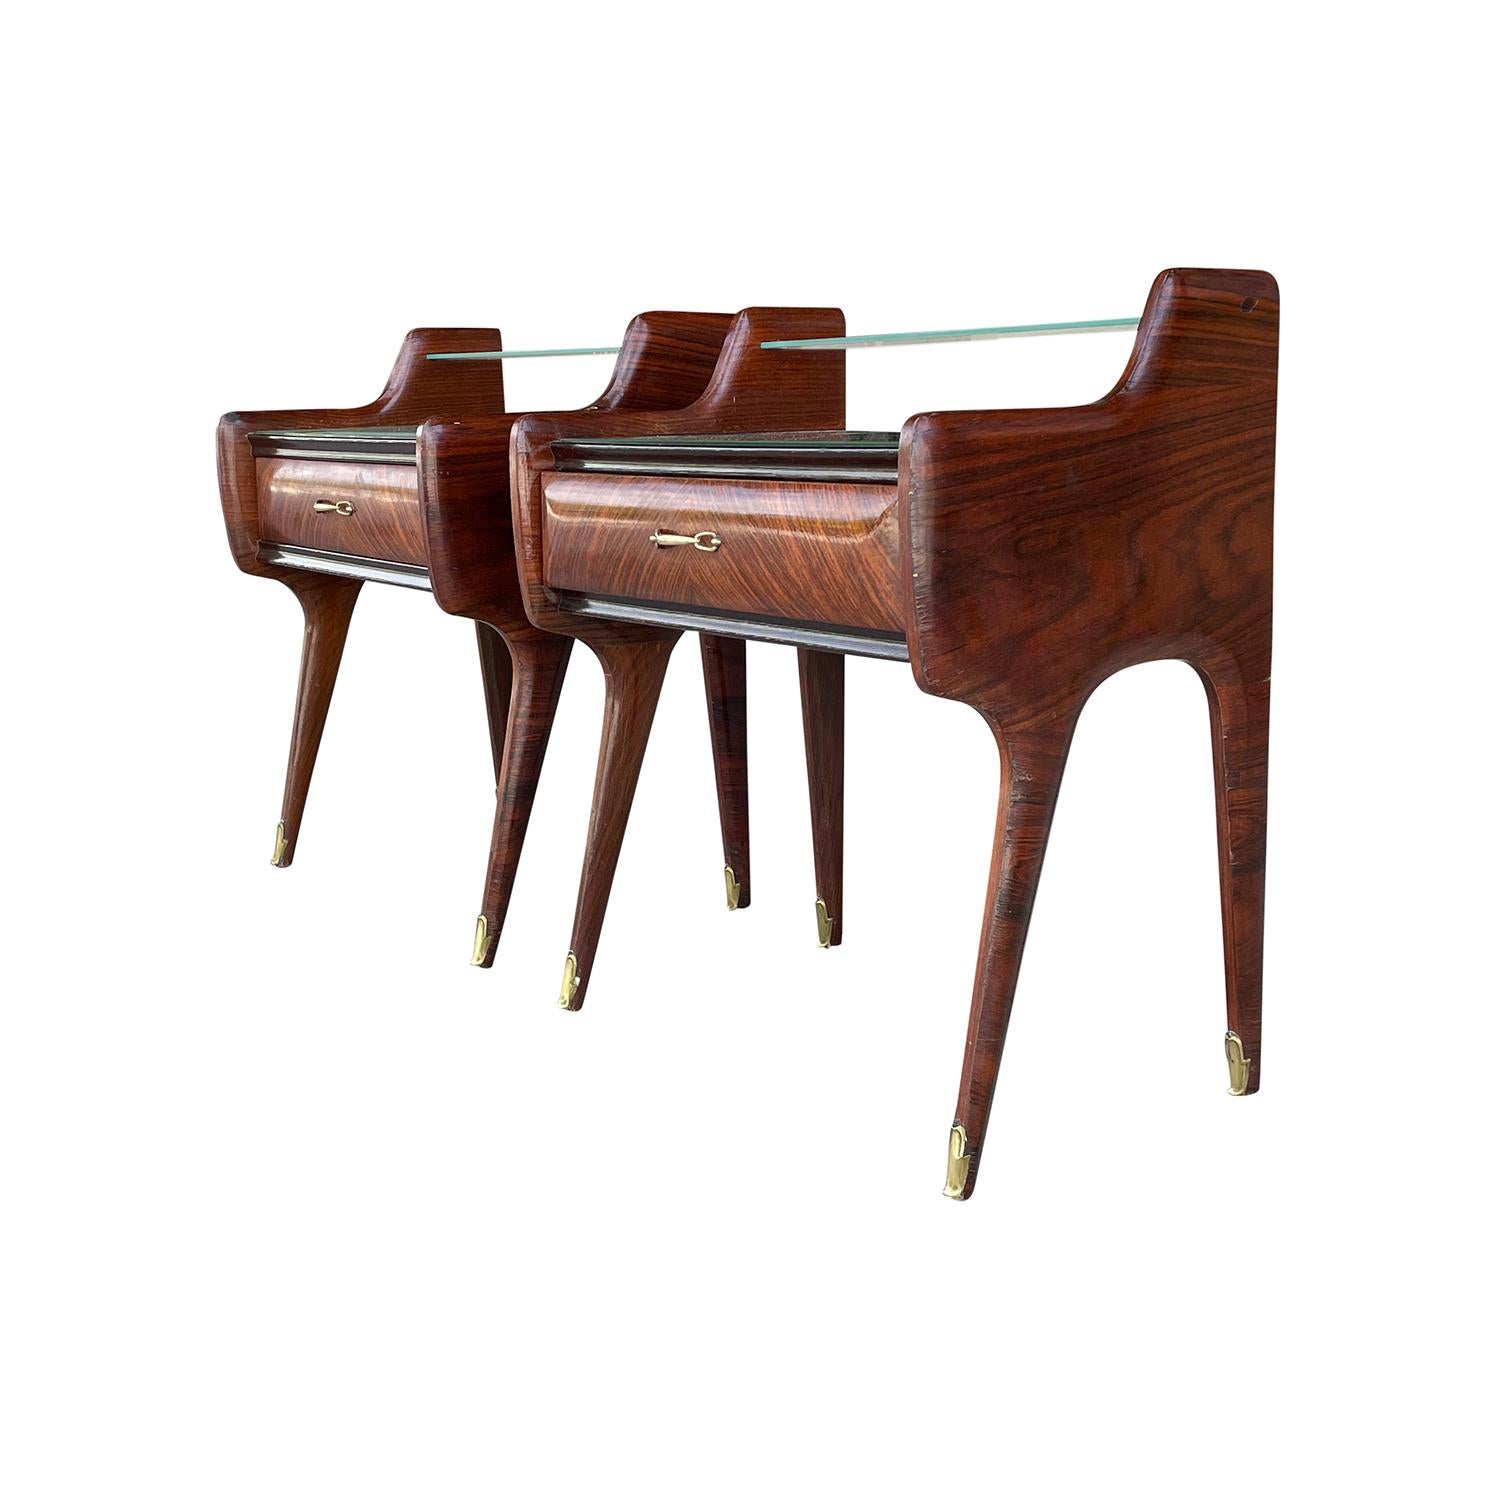 A dark-brown, vintage Mid-Century modern Italian pair of nightstands or side bed tables made of hand carved Rosewood with one-drawer and lacking glass shelves, enhanced by very detailed brass handles, supported on tapered legs. The ebonized bed side